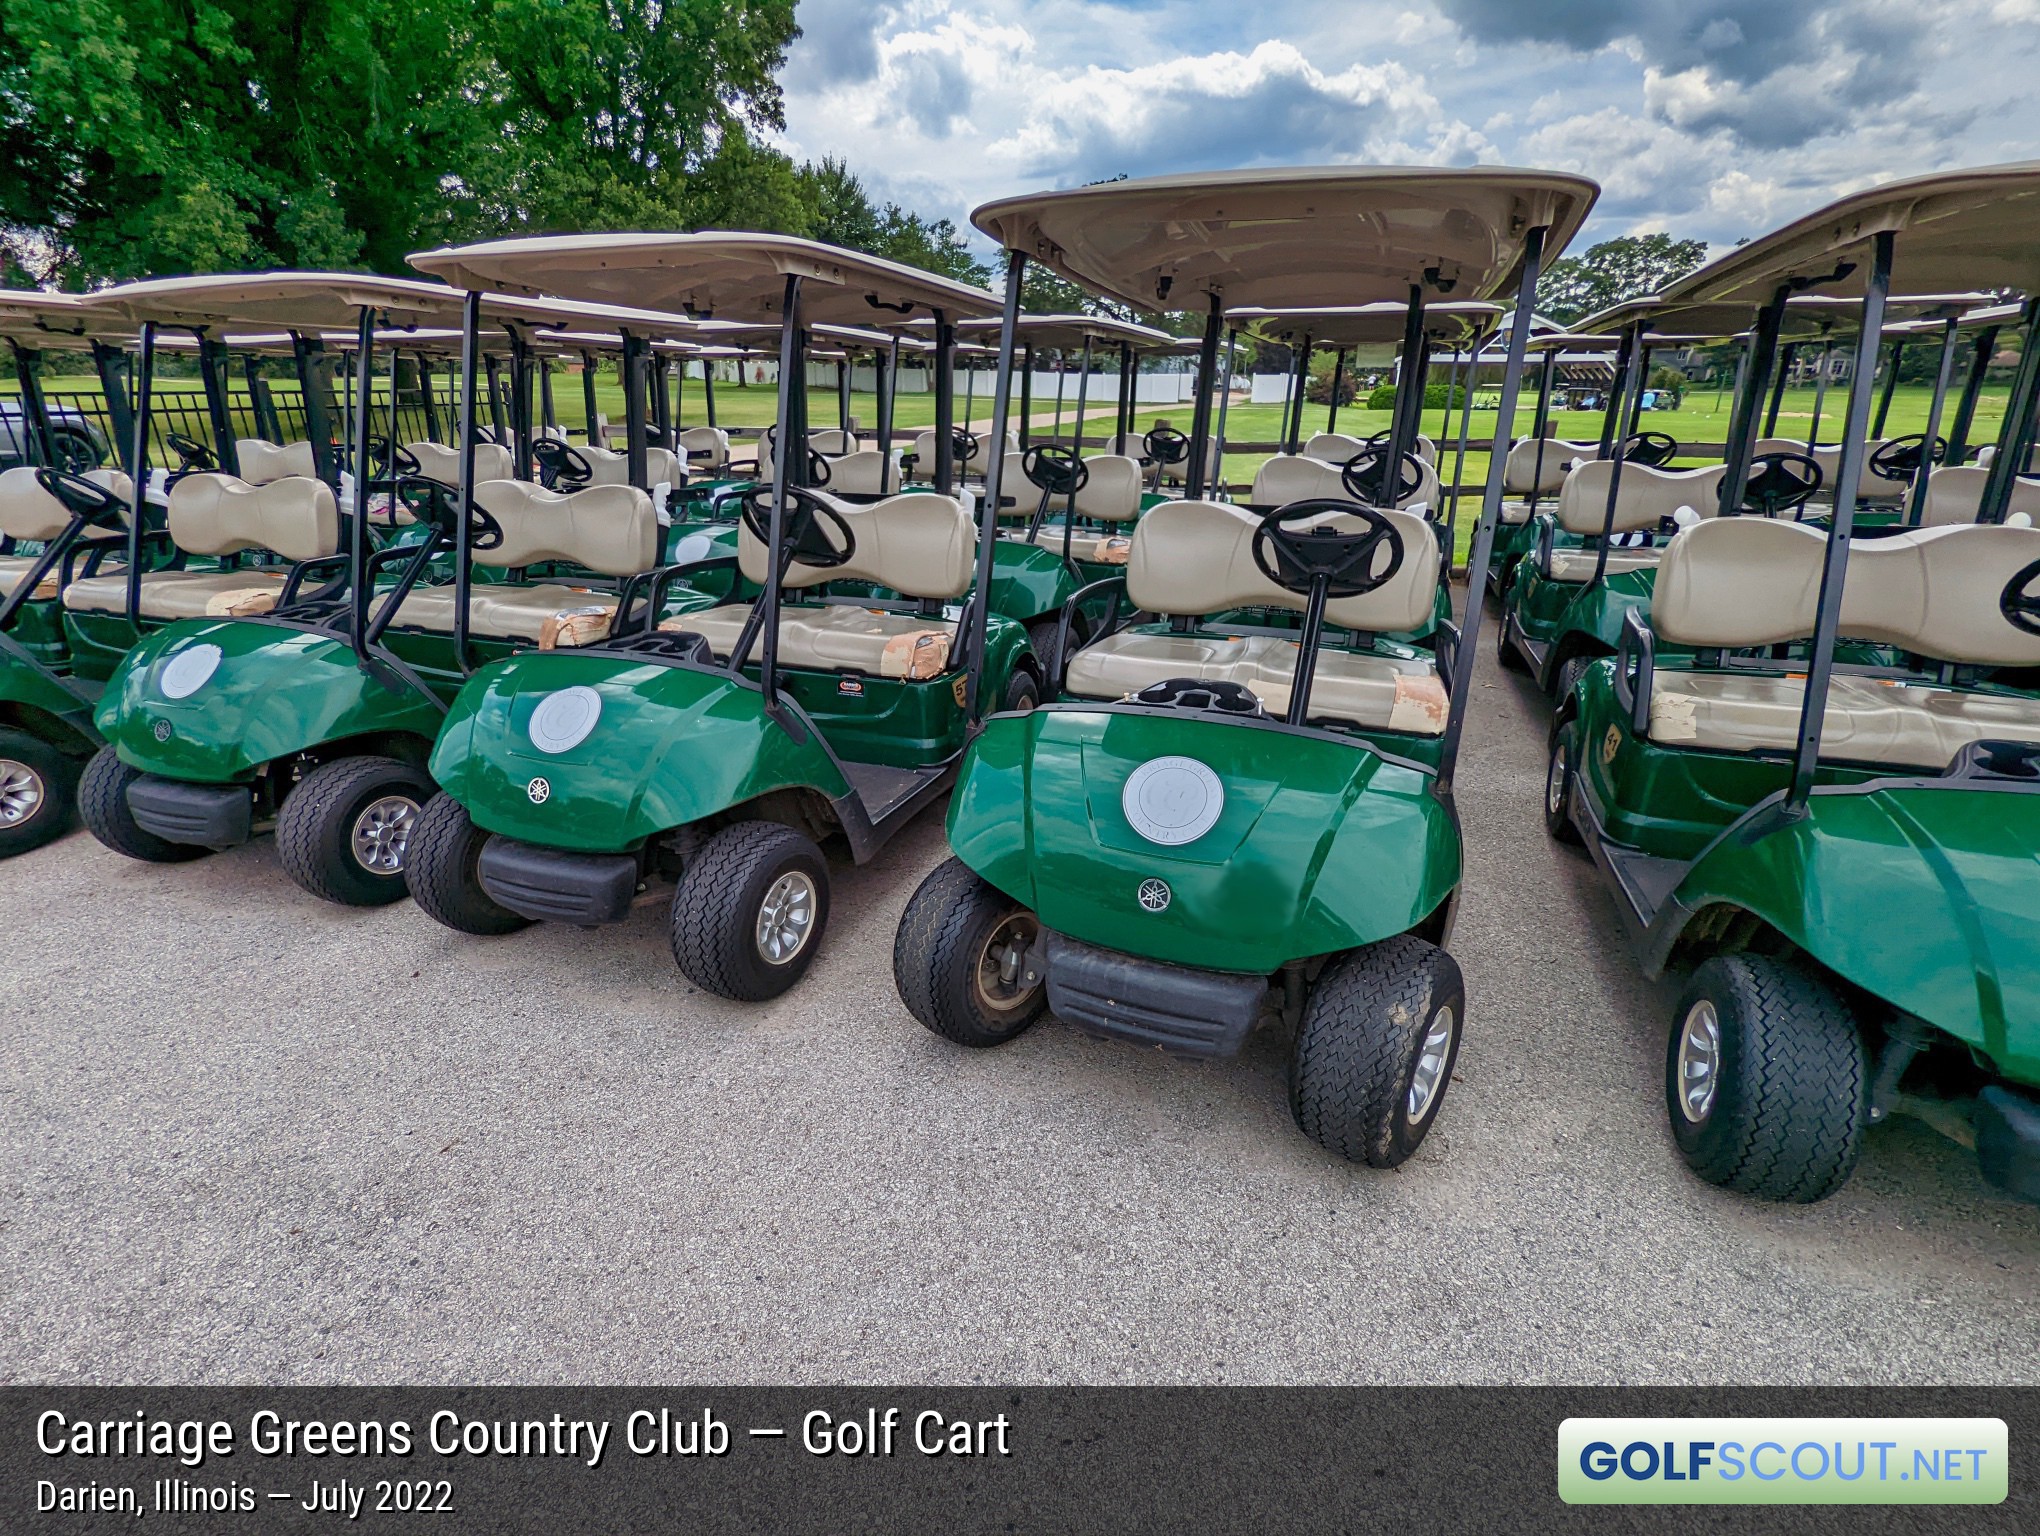 Photo of the golf carts at Carriage Greens Country Club in Darien, Illinois. For some reason, the seat of every golf cart had the corners damaged or torn out. Never seen that before. Literally every cart.